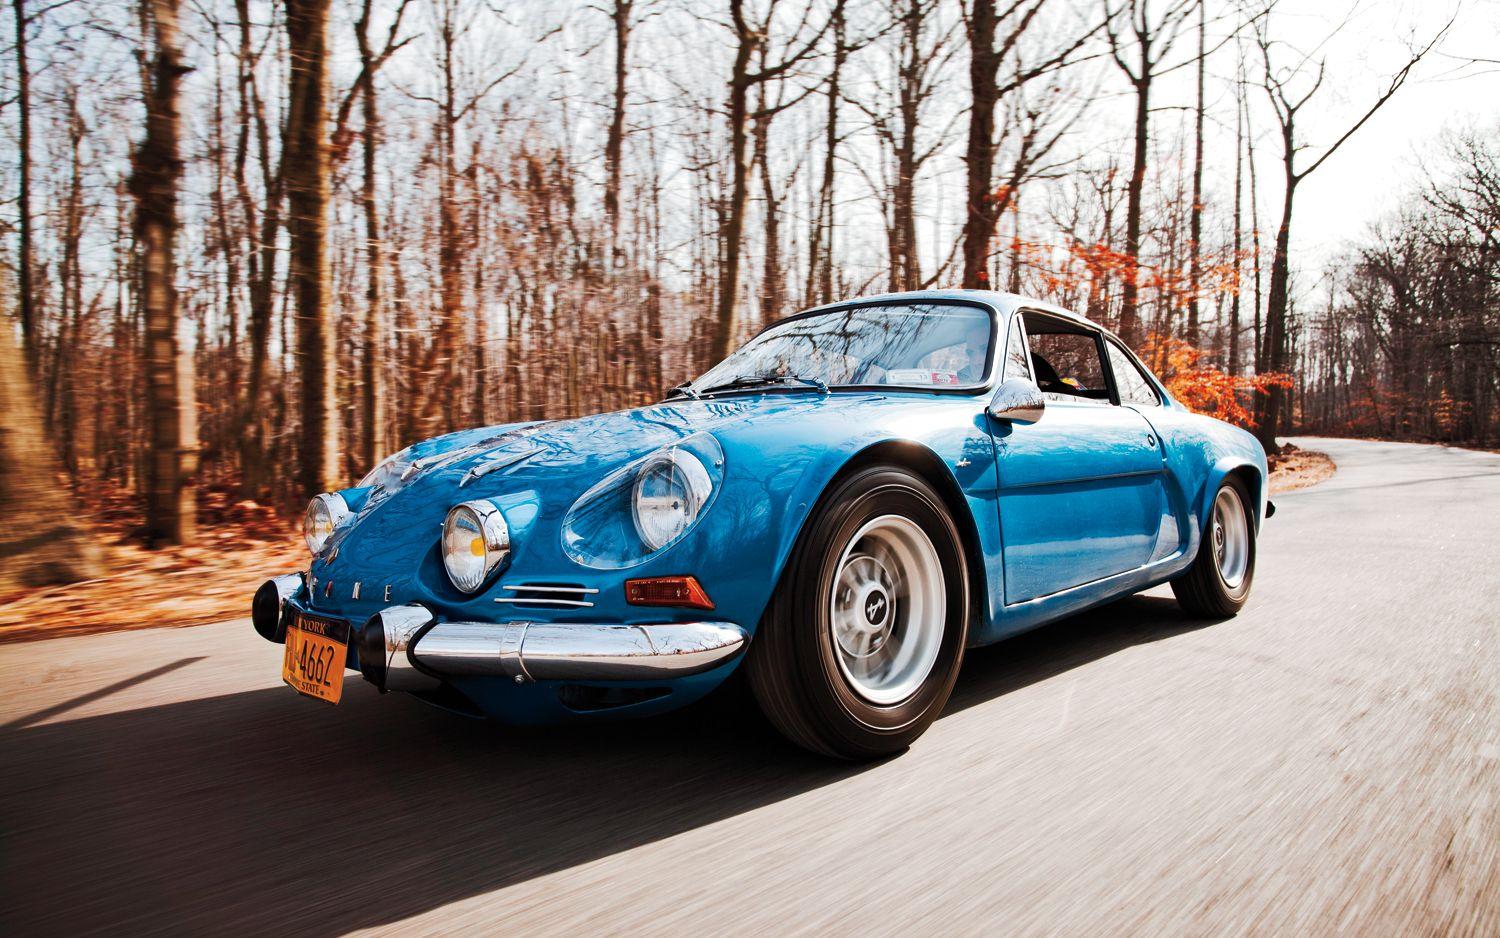 For me, one of the most beautiful cars ever made. Renault Alpine